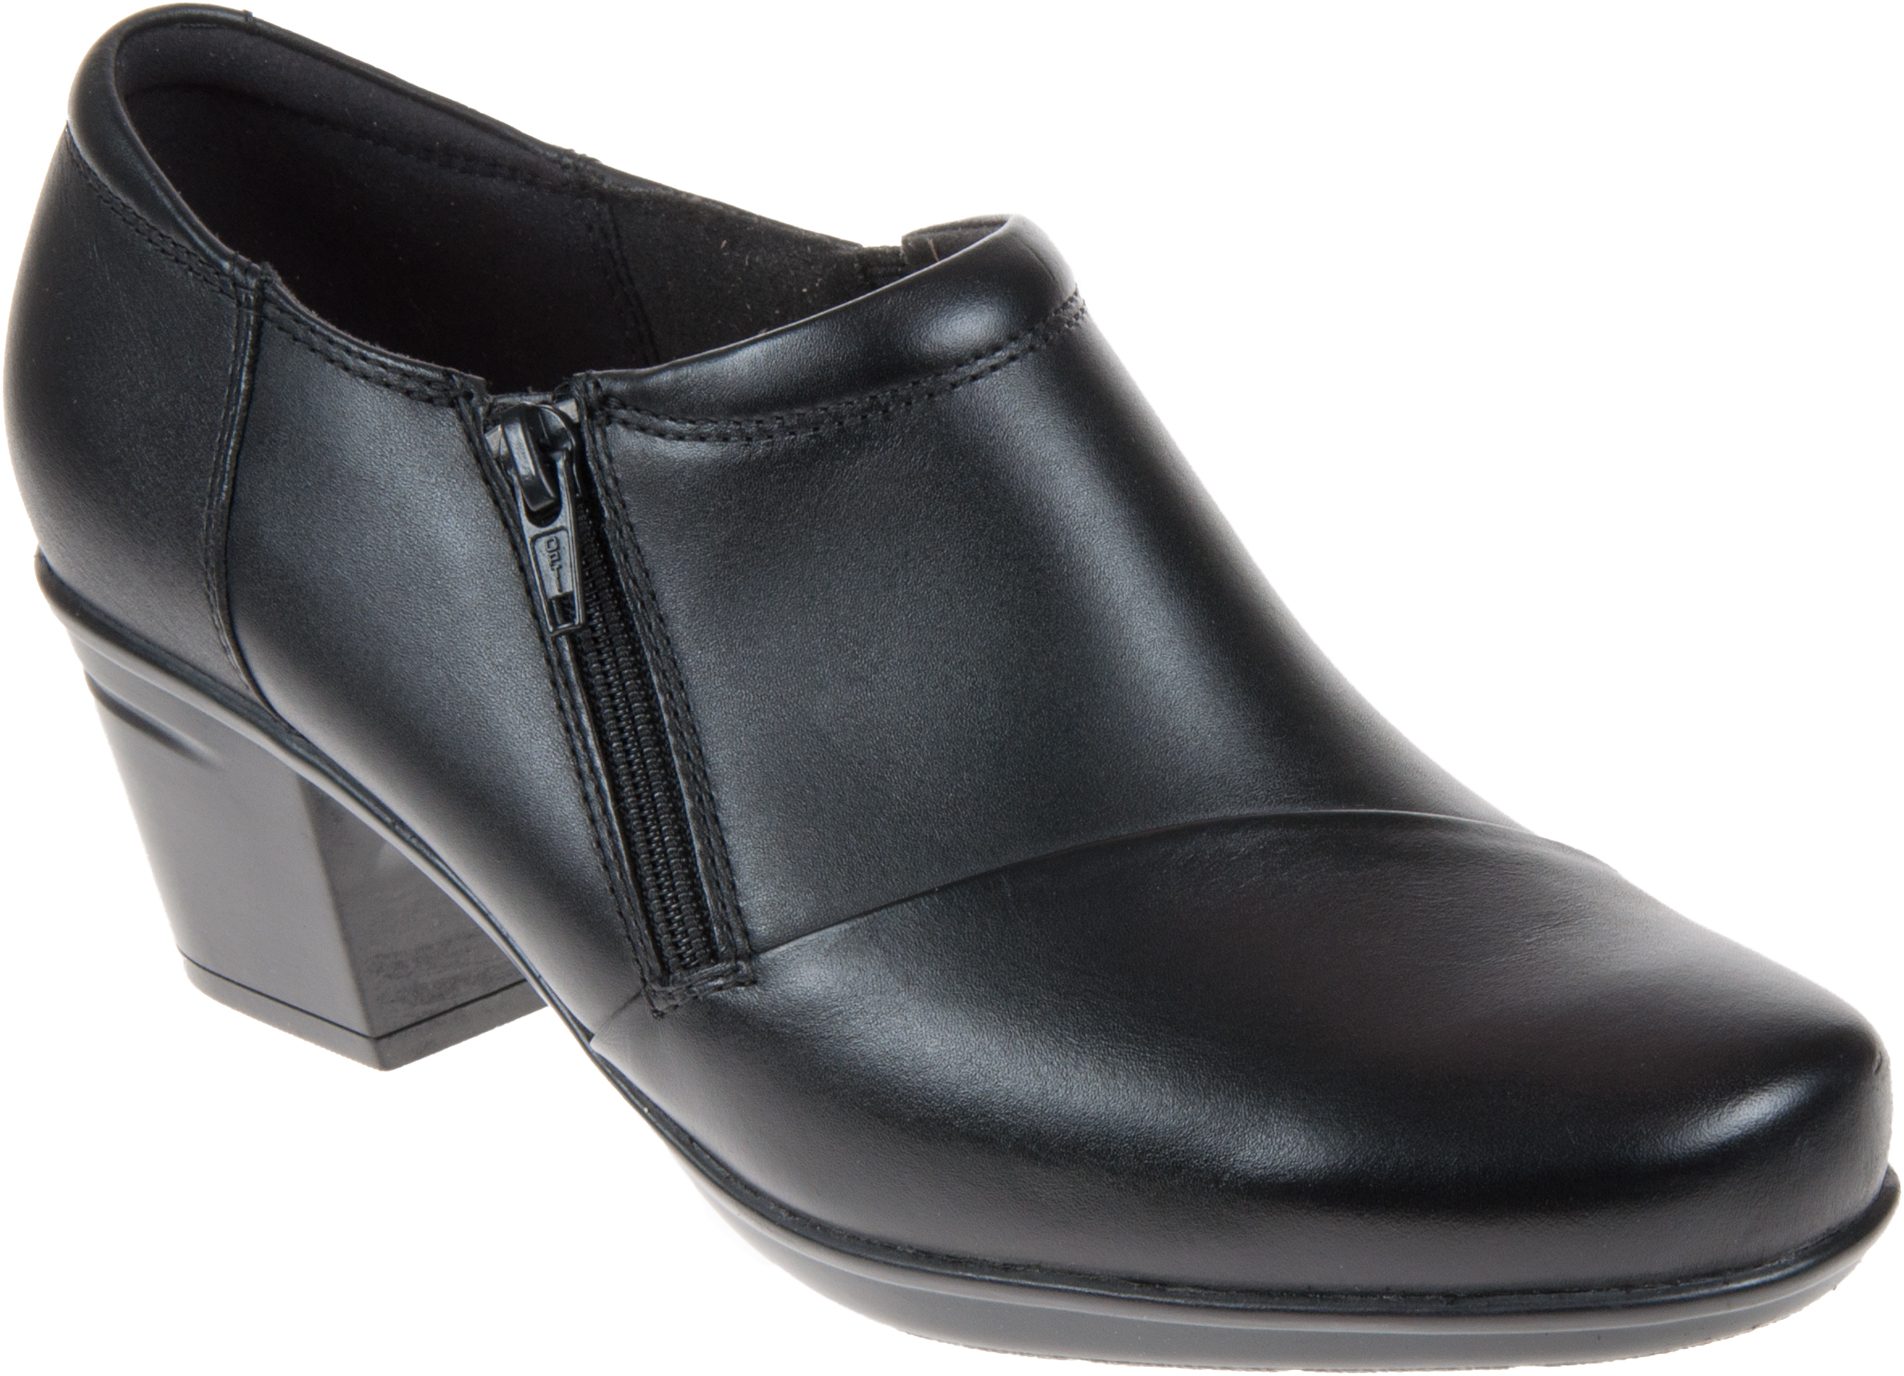 Clarks Emslie Claudia Black Leather 26137024 - Everyday Shoes ...